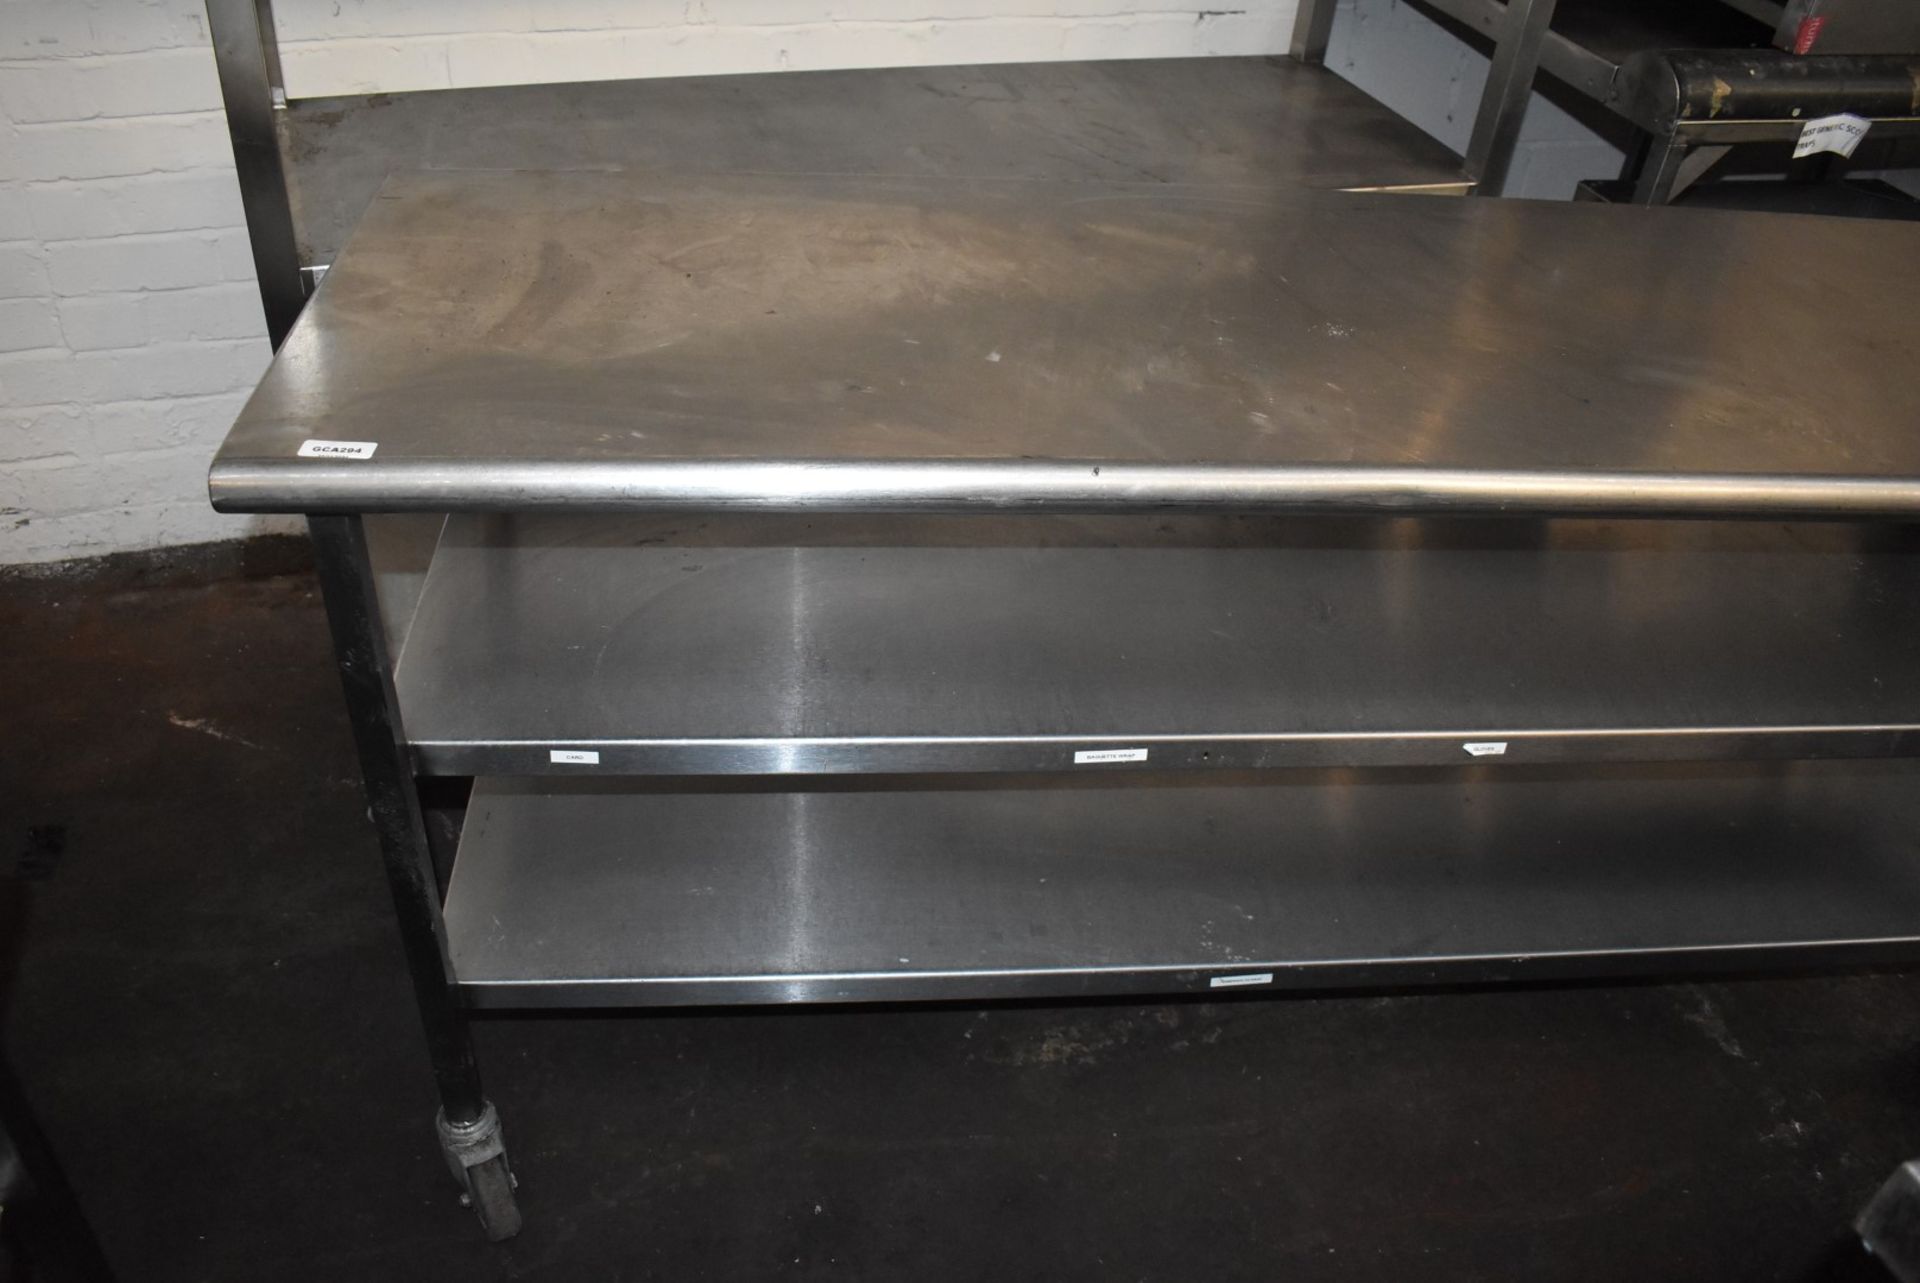 1 x Stainless Steel Prep Table Featuring Castor Wheels, Undershelves and Knife Block - Size: H87 x - Image 8 of 8